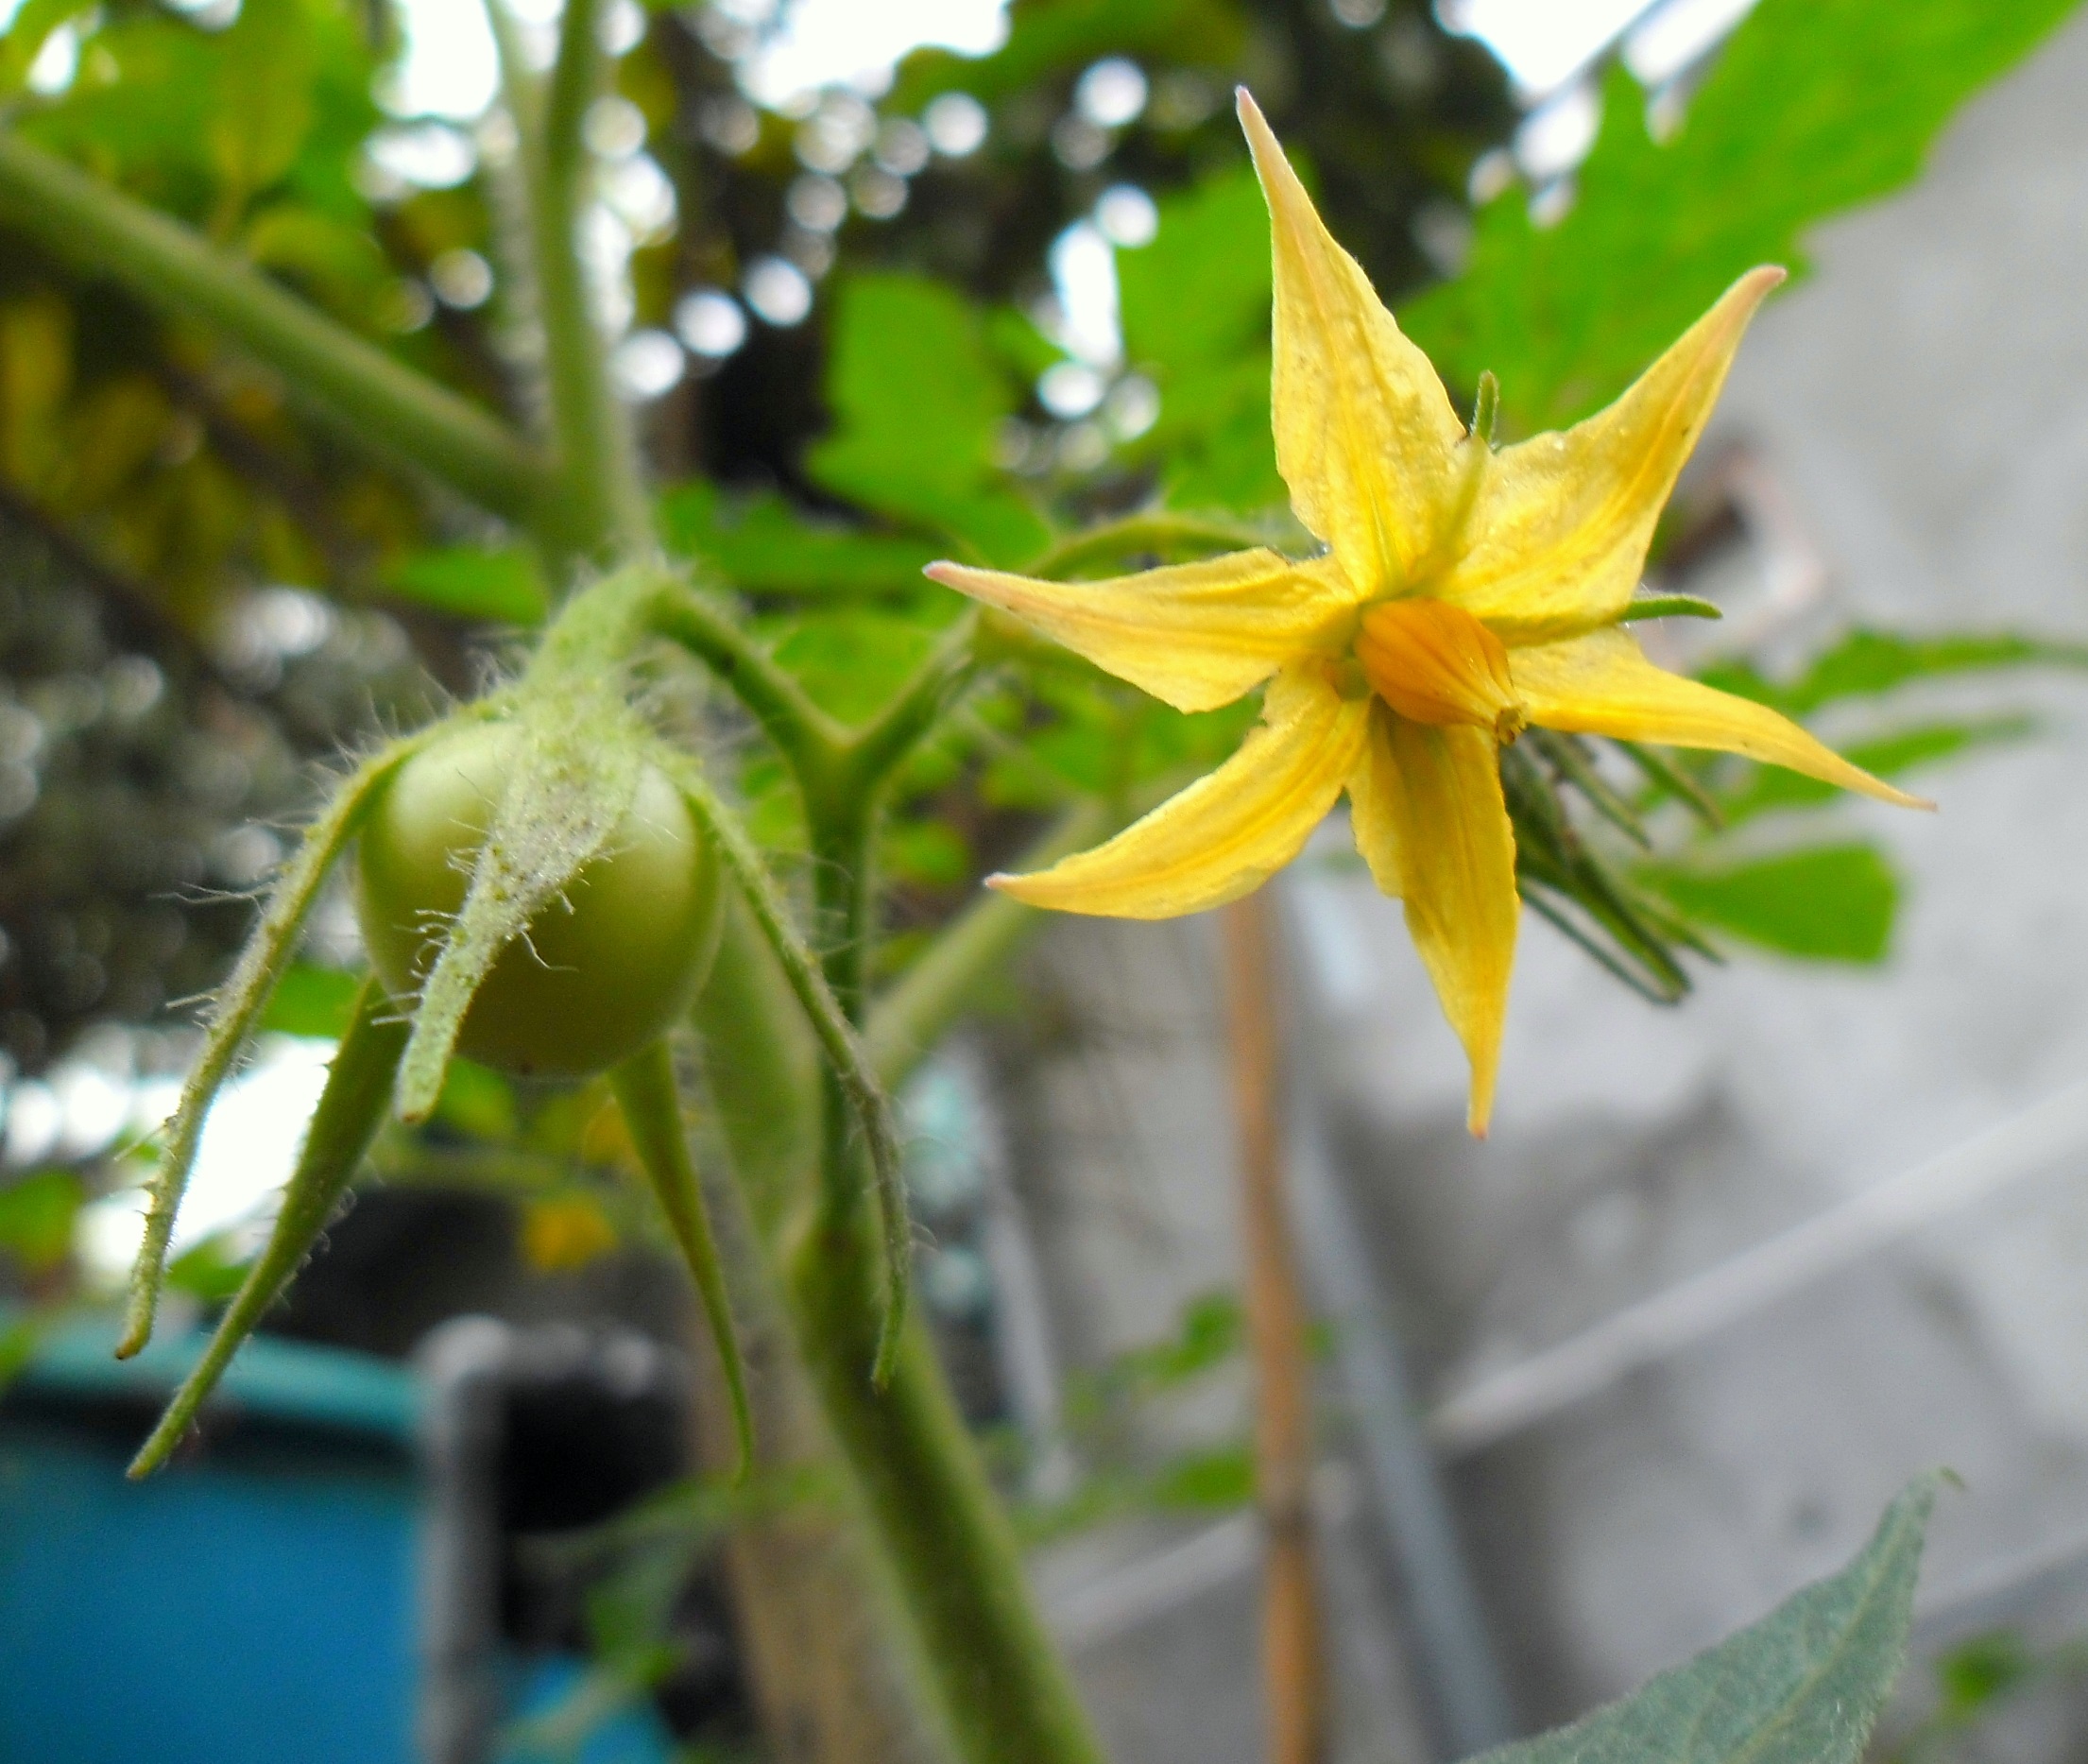 File:Tomato flower and young fruit.jpg - Wikimedia Commons